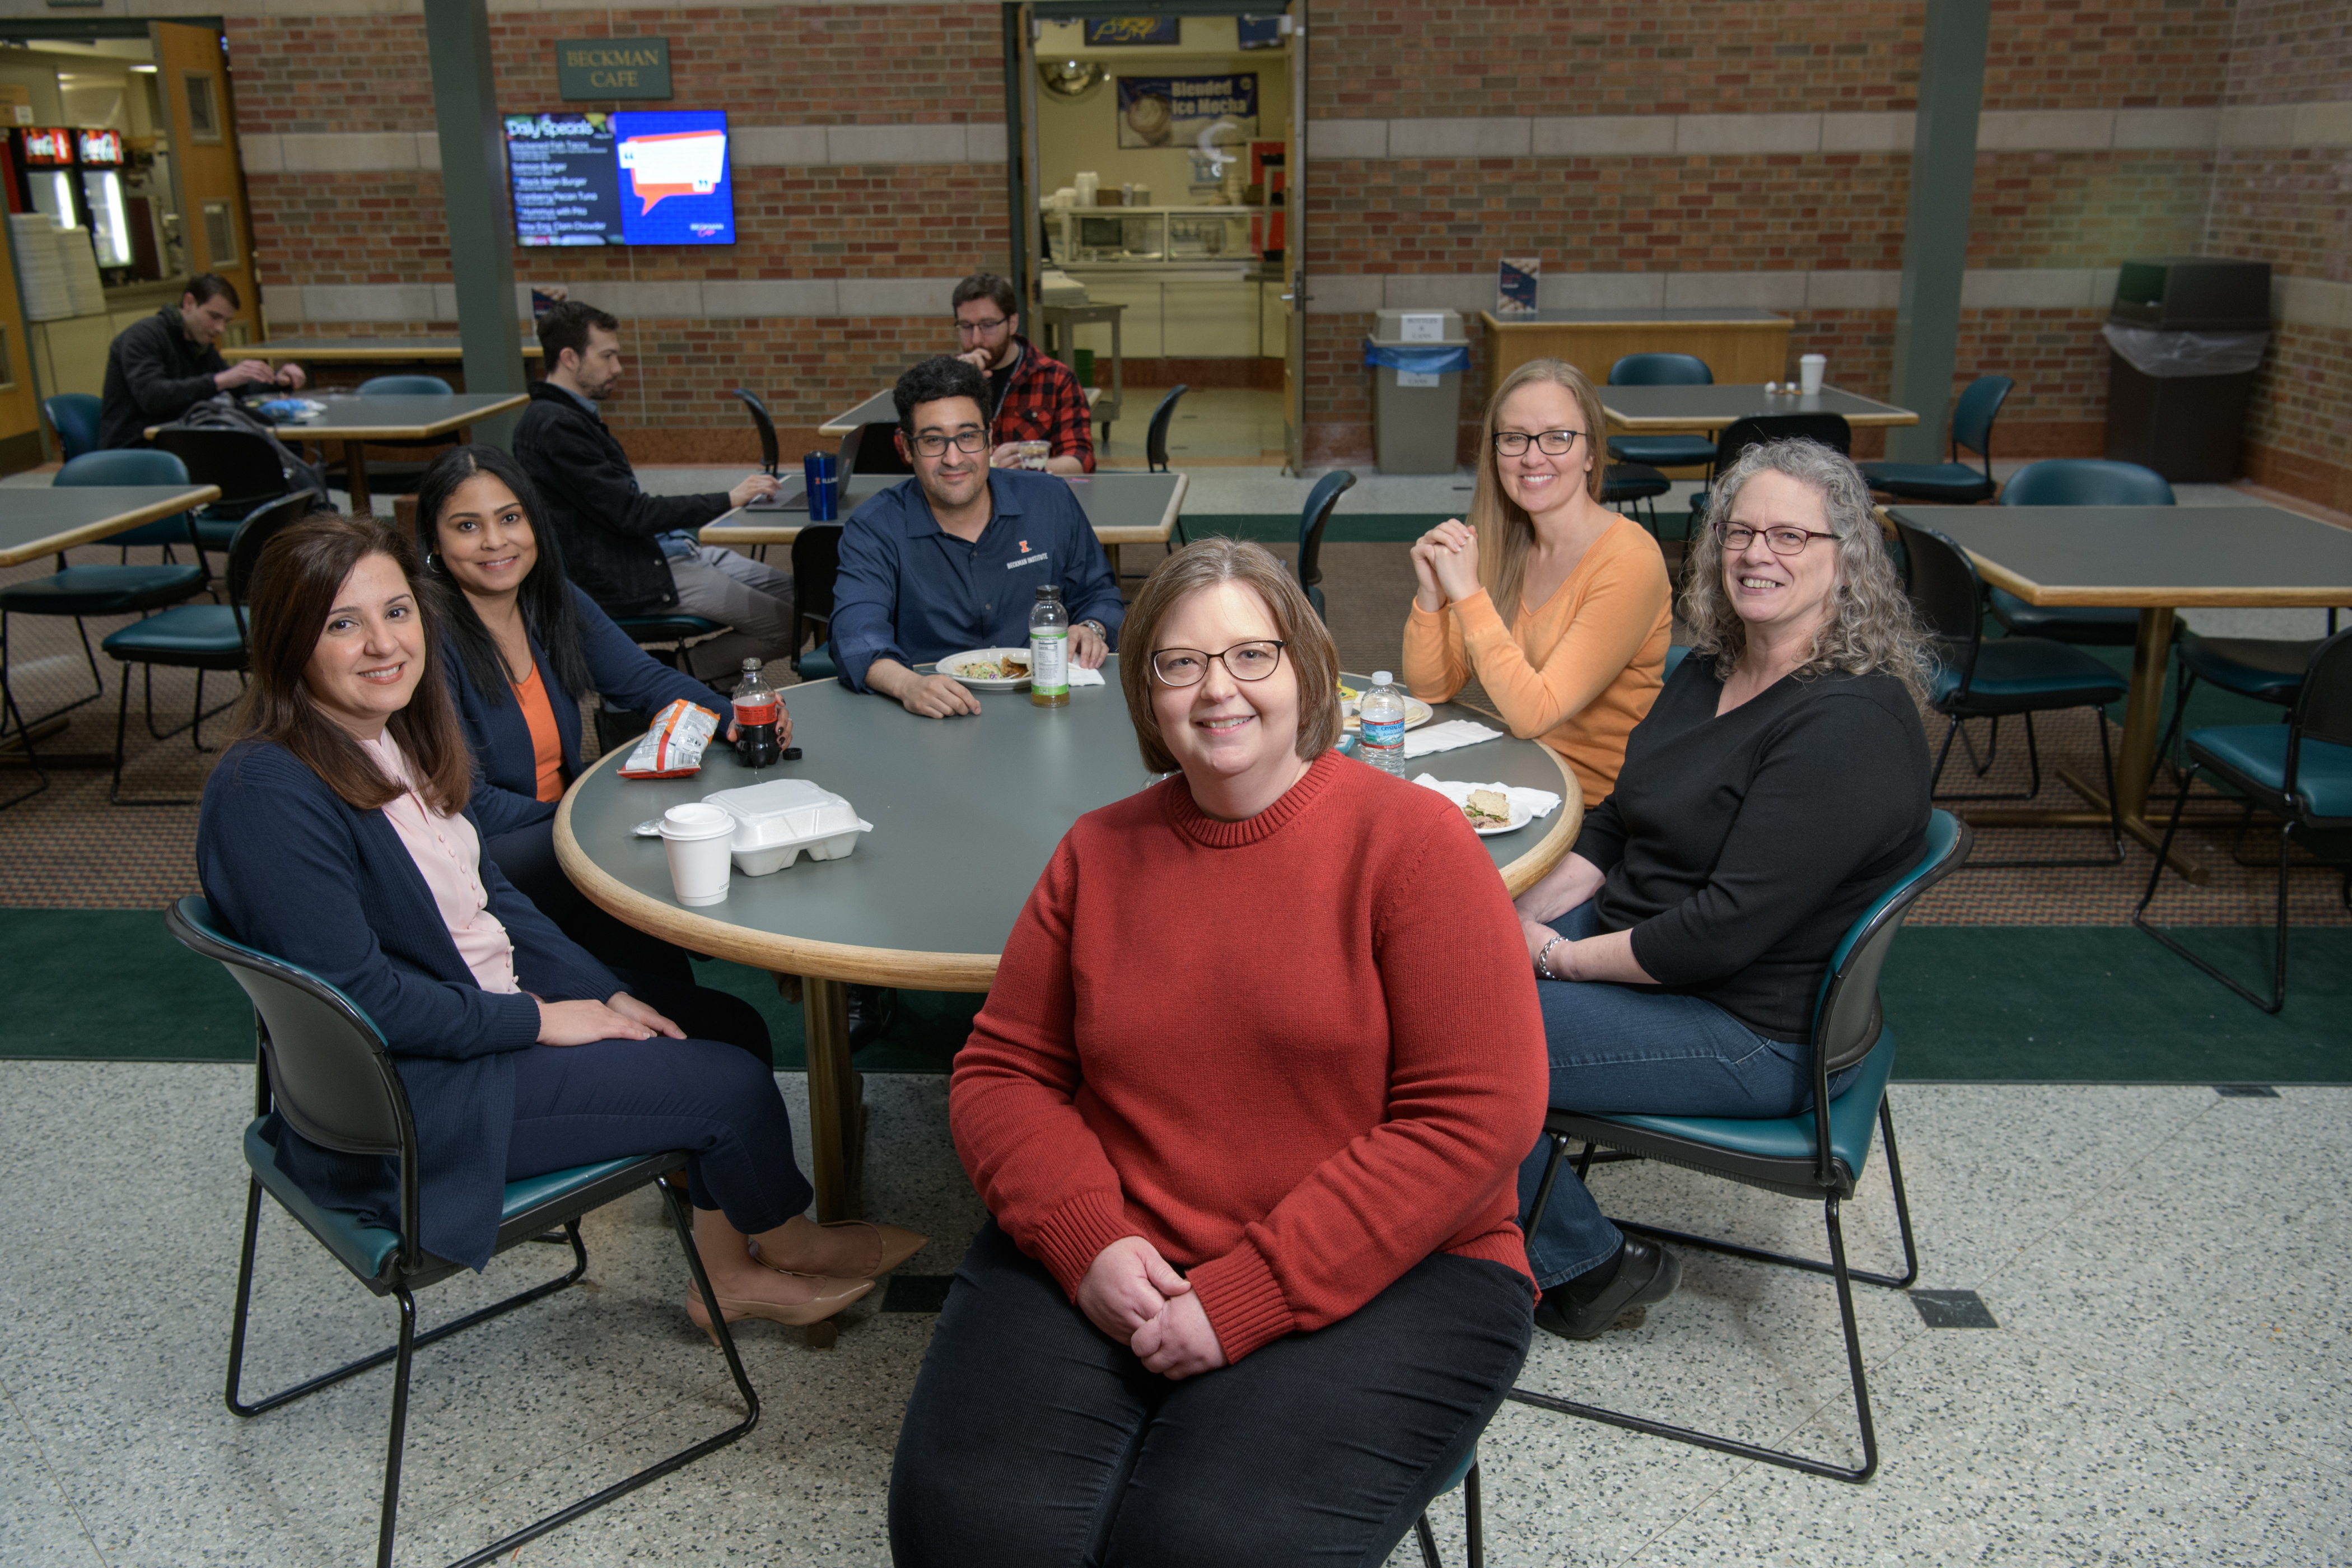 The members of the Beckman Business Office share a meal in the Beckman Café.